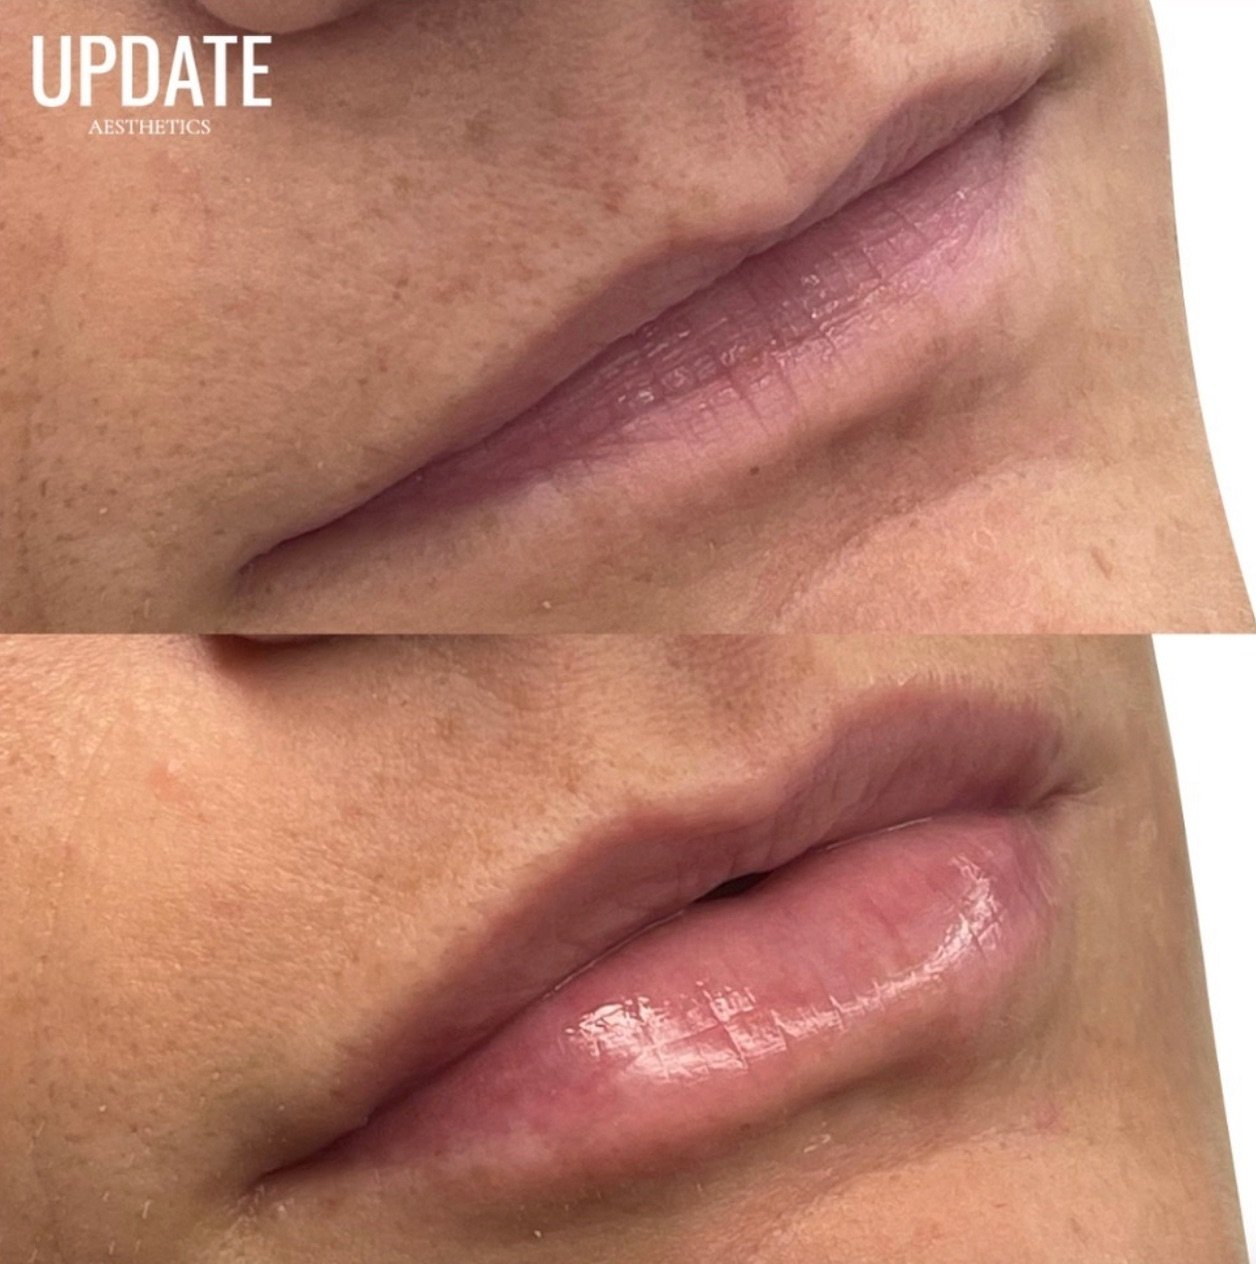 Nina&rsquo;s precision and expertise shine through in her approach to lip enhancements. ⁠
⁠
With a keen eye for detail, she understands that sometimes, a subtle boost is all it takes to elevate confidence. ⁠
⁠
Her natural approach ensures balance and